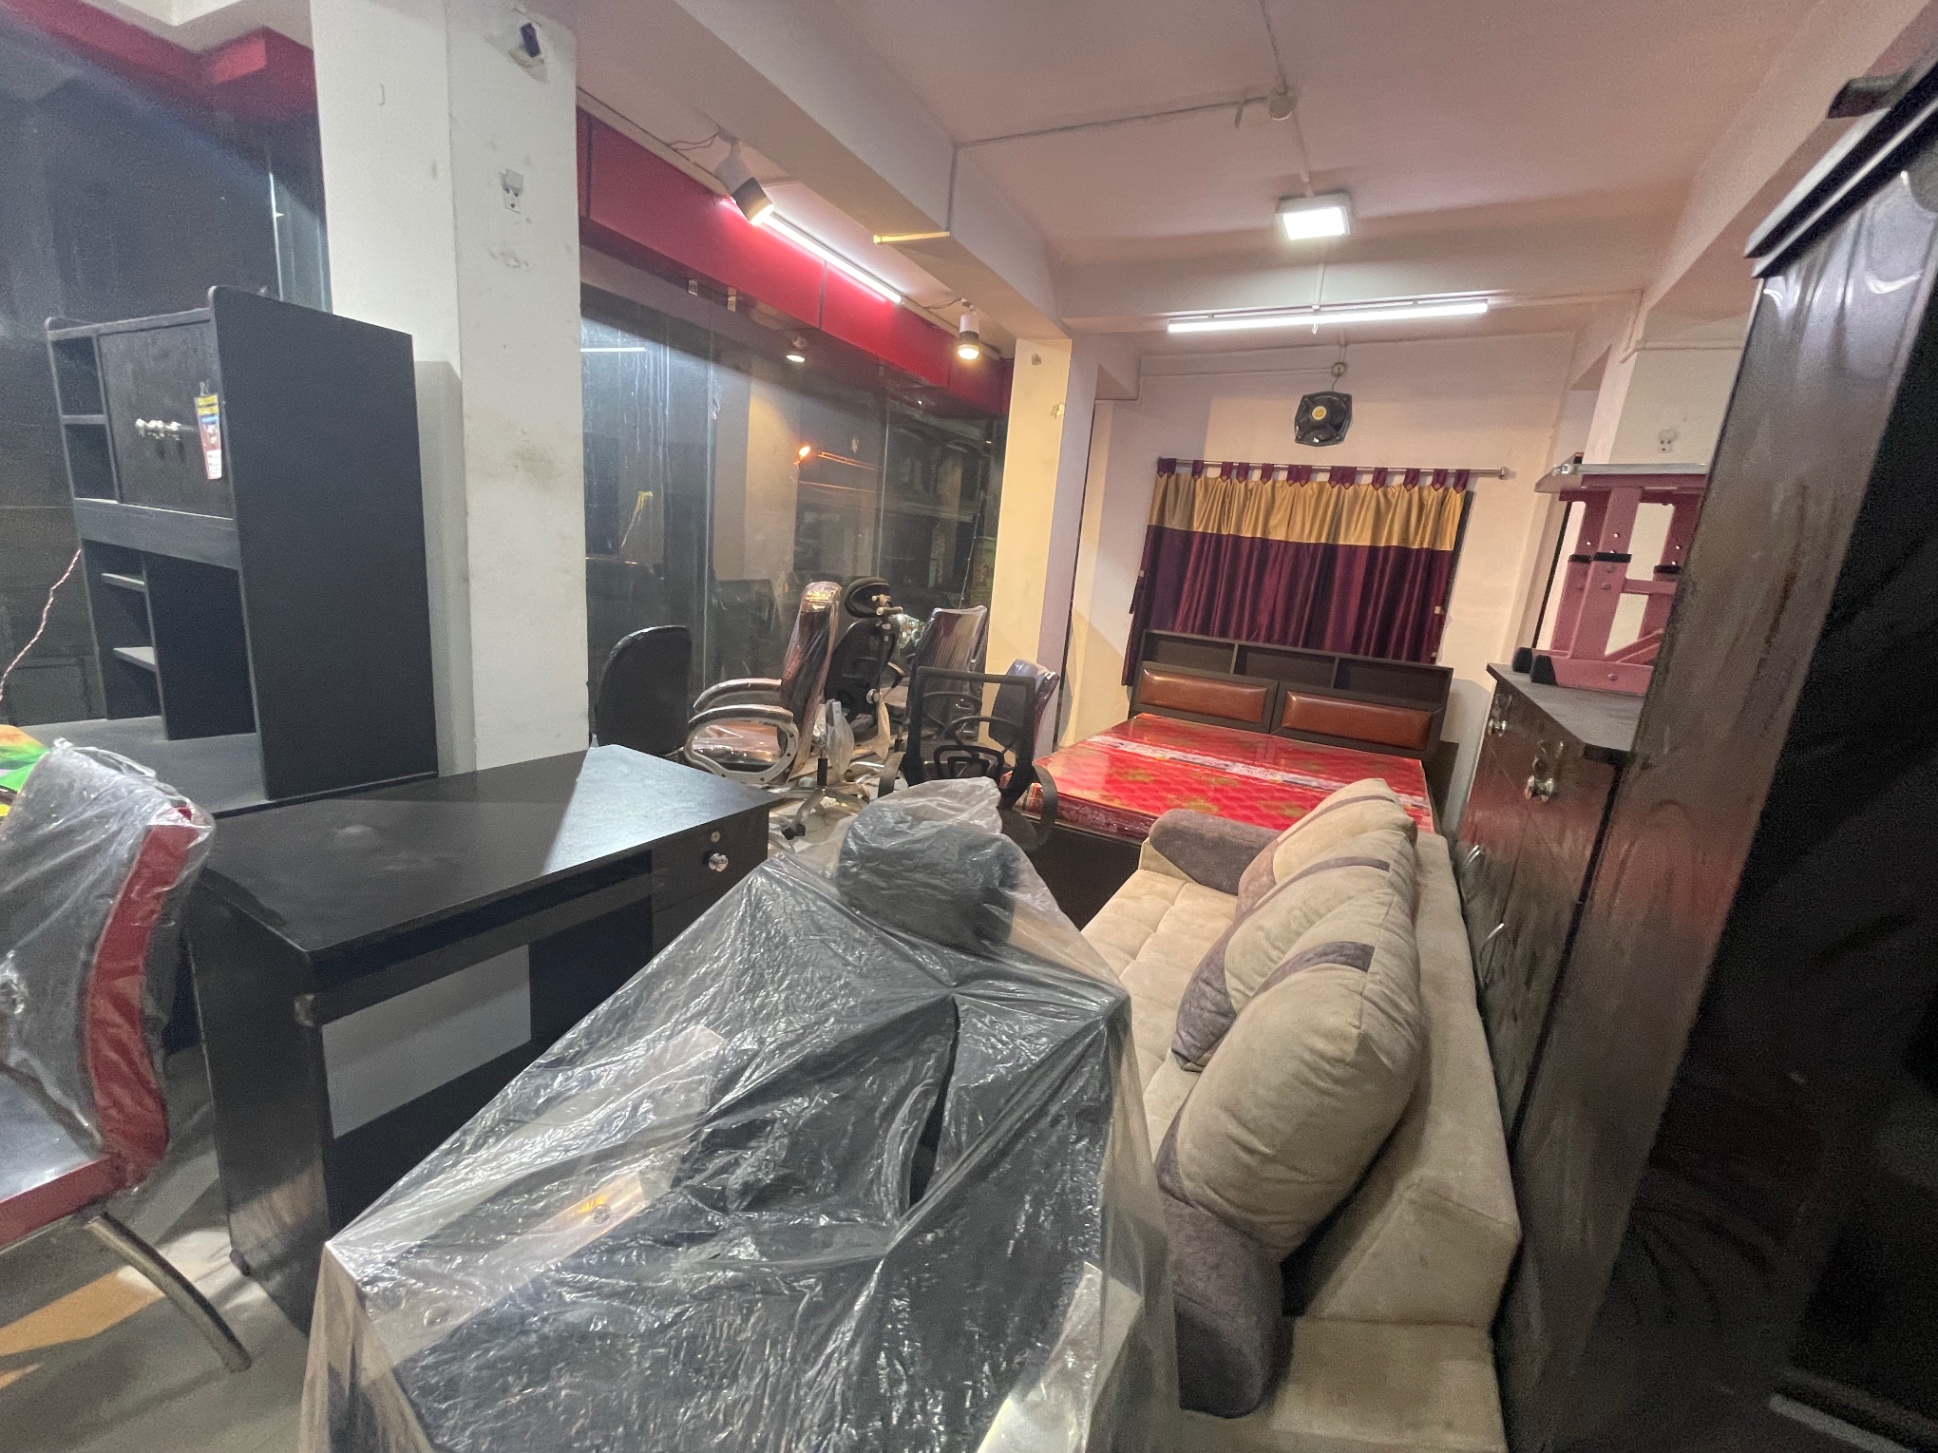 Rent Office/ Shop, 1380 sq ft carpet area, Semi Furnished for rent @Serampore Hooghly